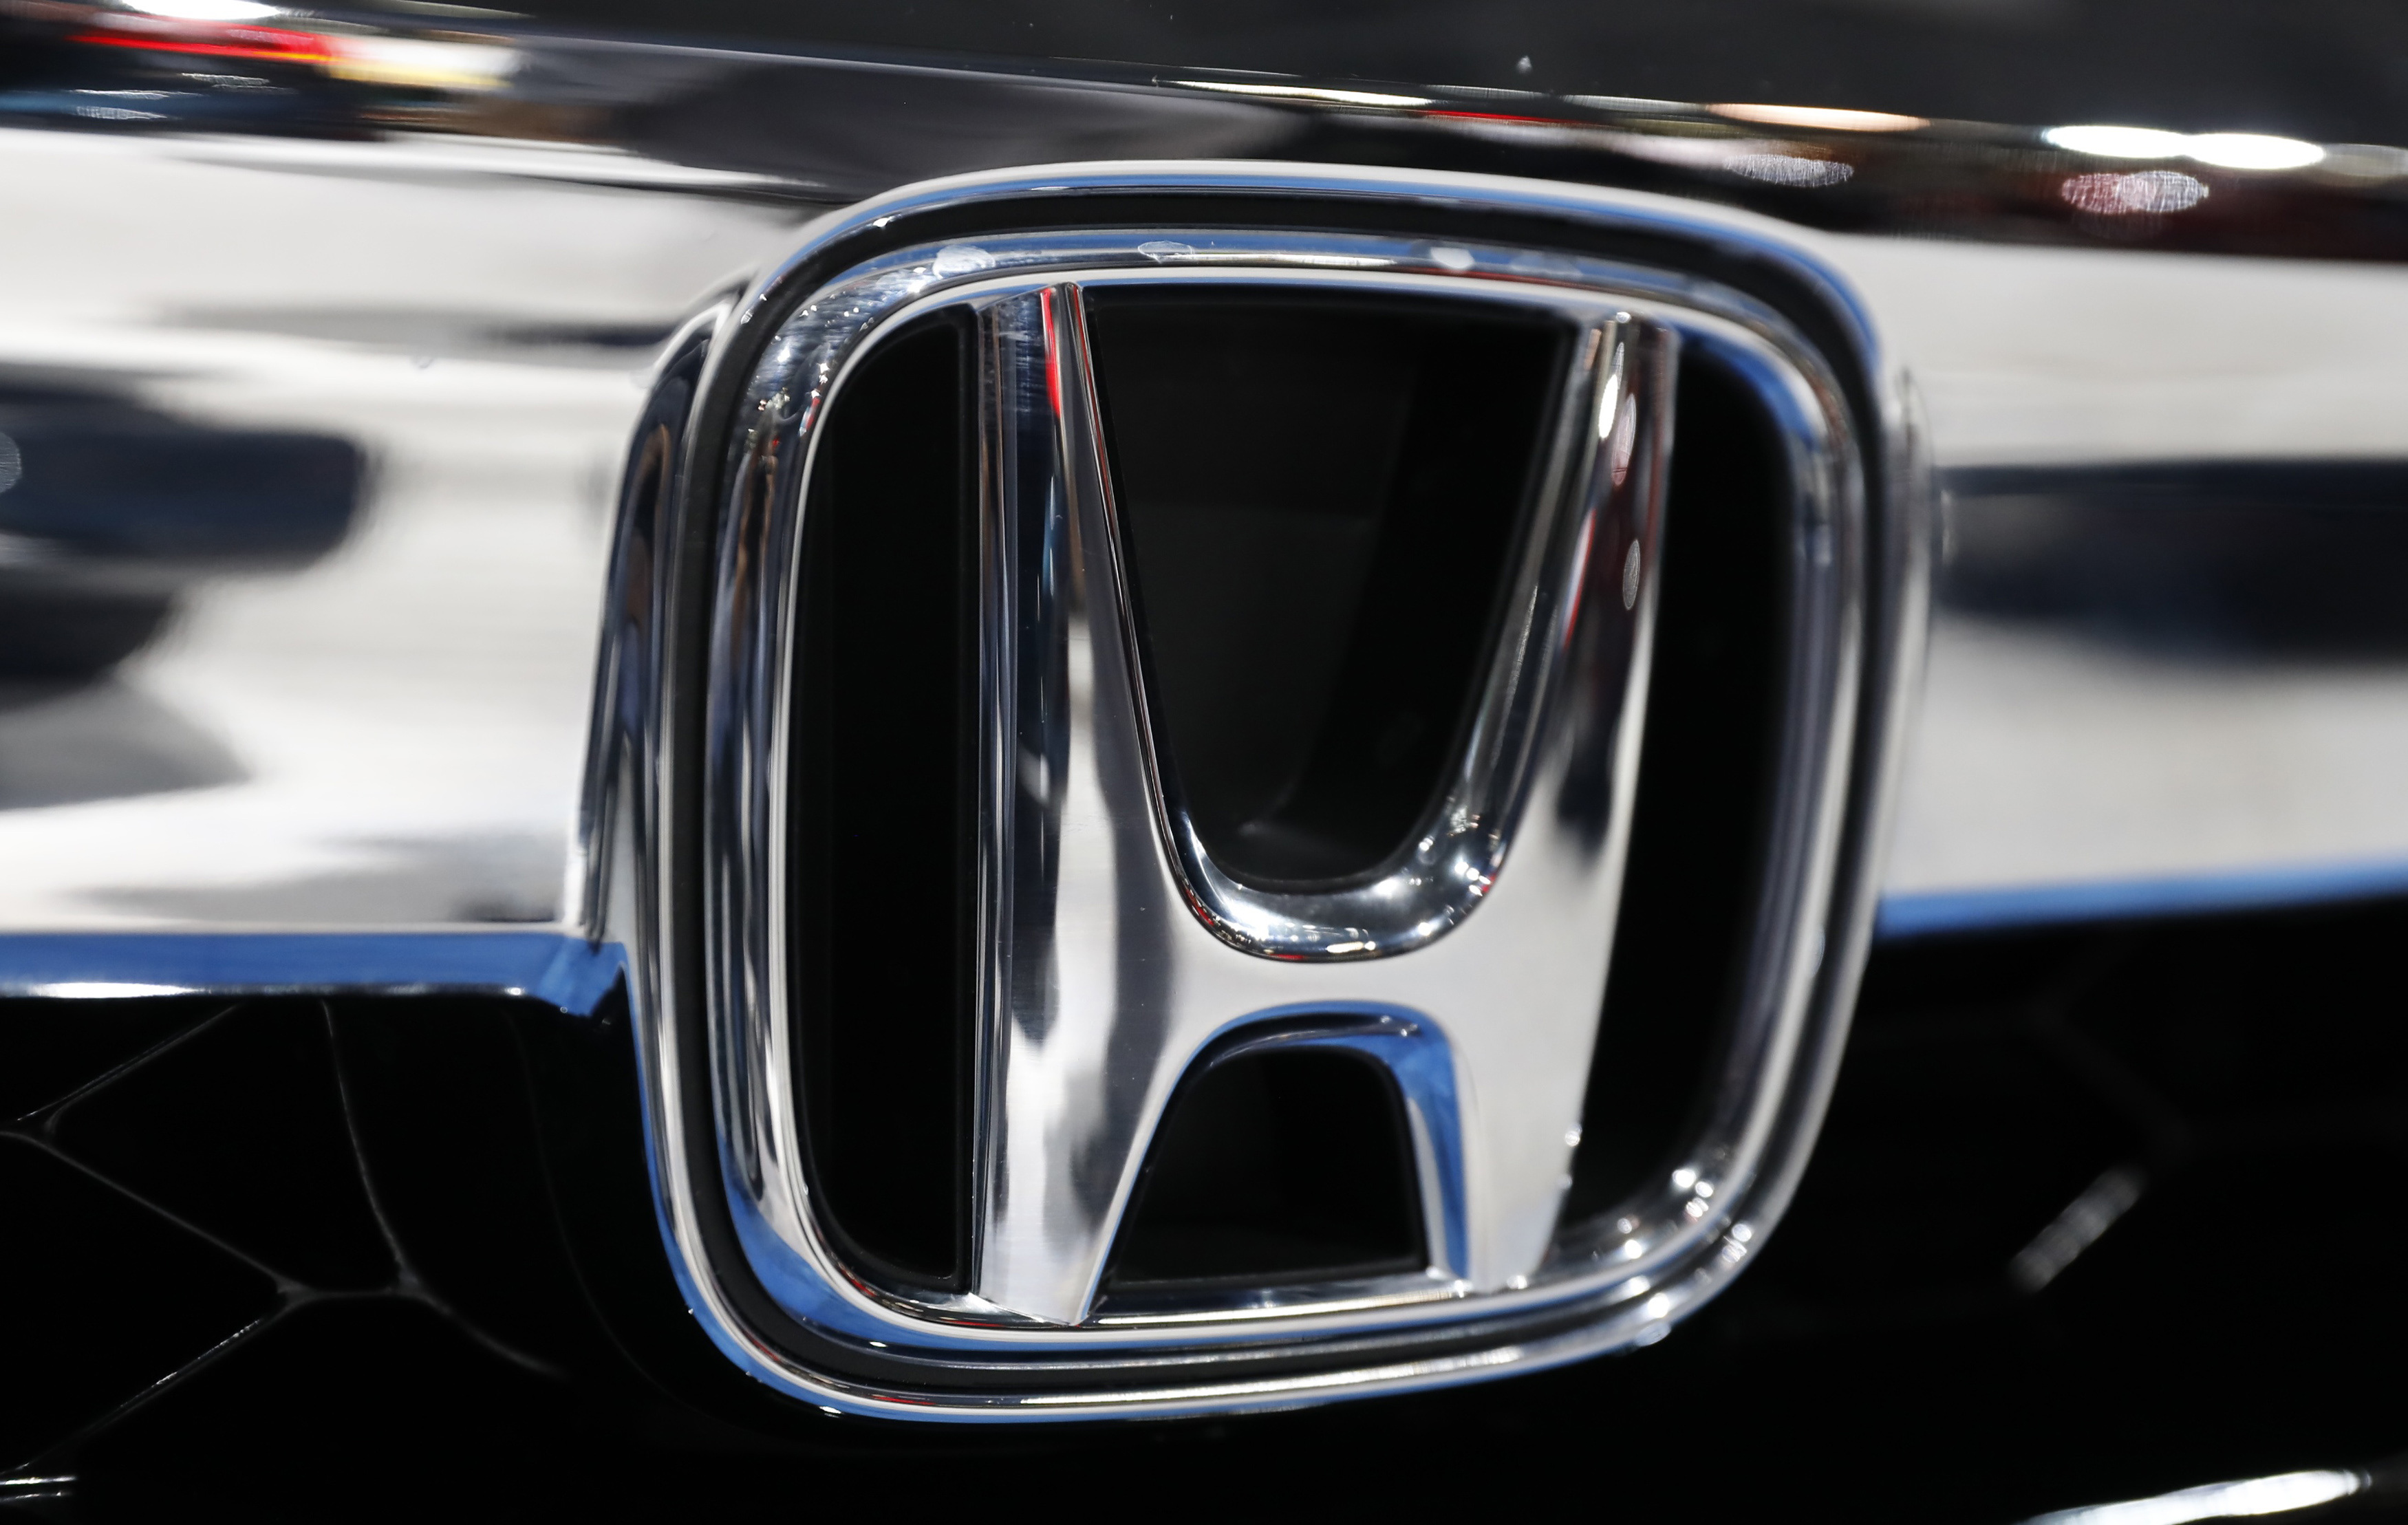 The Honda logo is seen on a Honda car at the New York Auto Show in New York